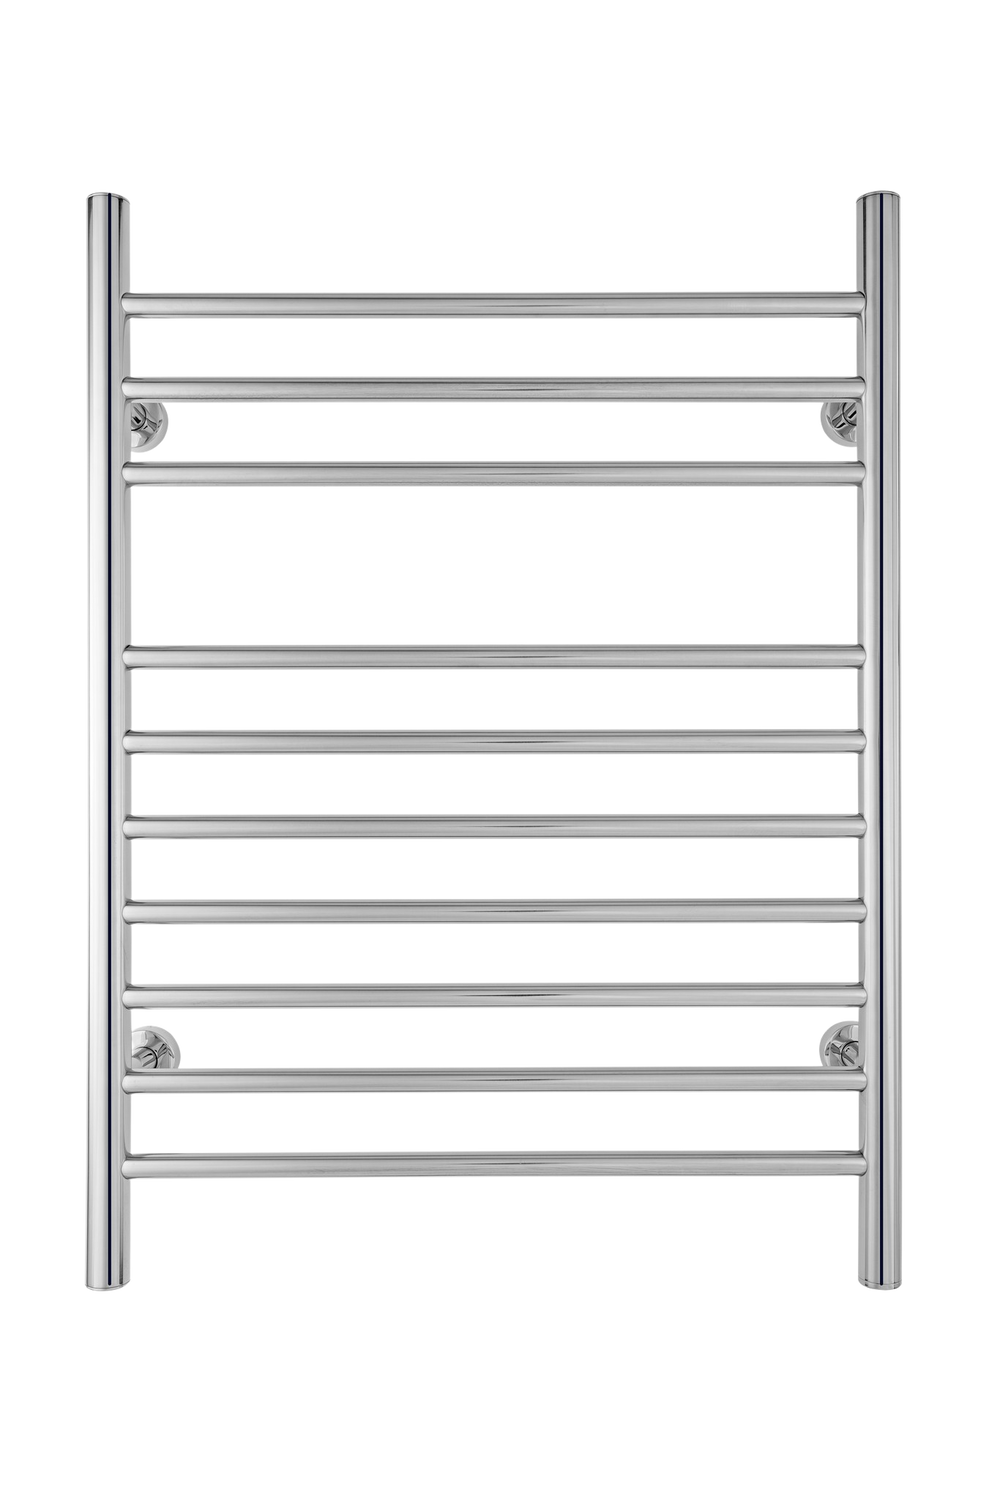 WarmlyYours TW-F10PS-HP Infinity Dual Connection 10 Bar Towel Warmer in Polished Stainless Steel New